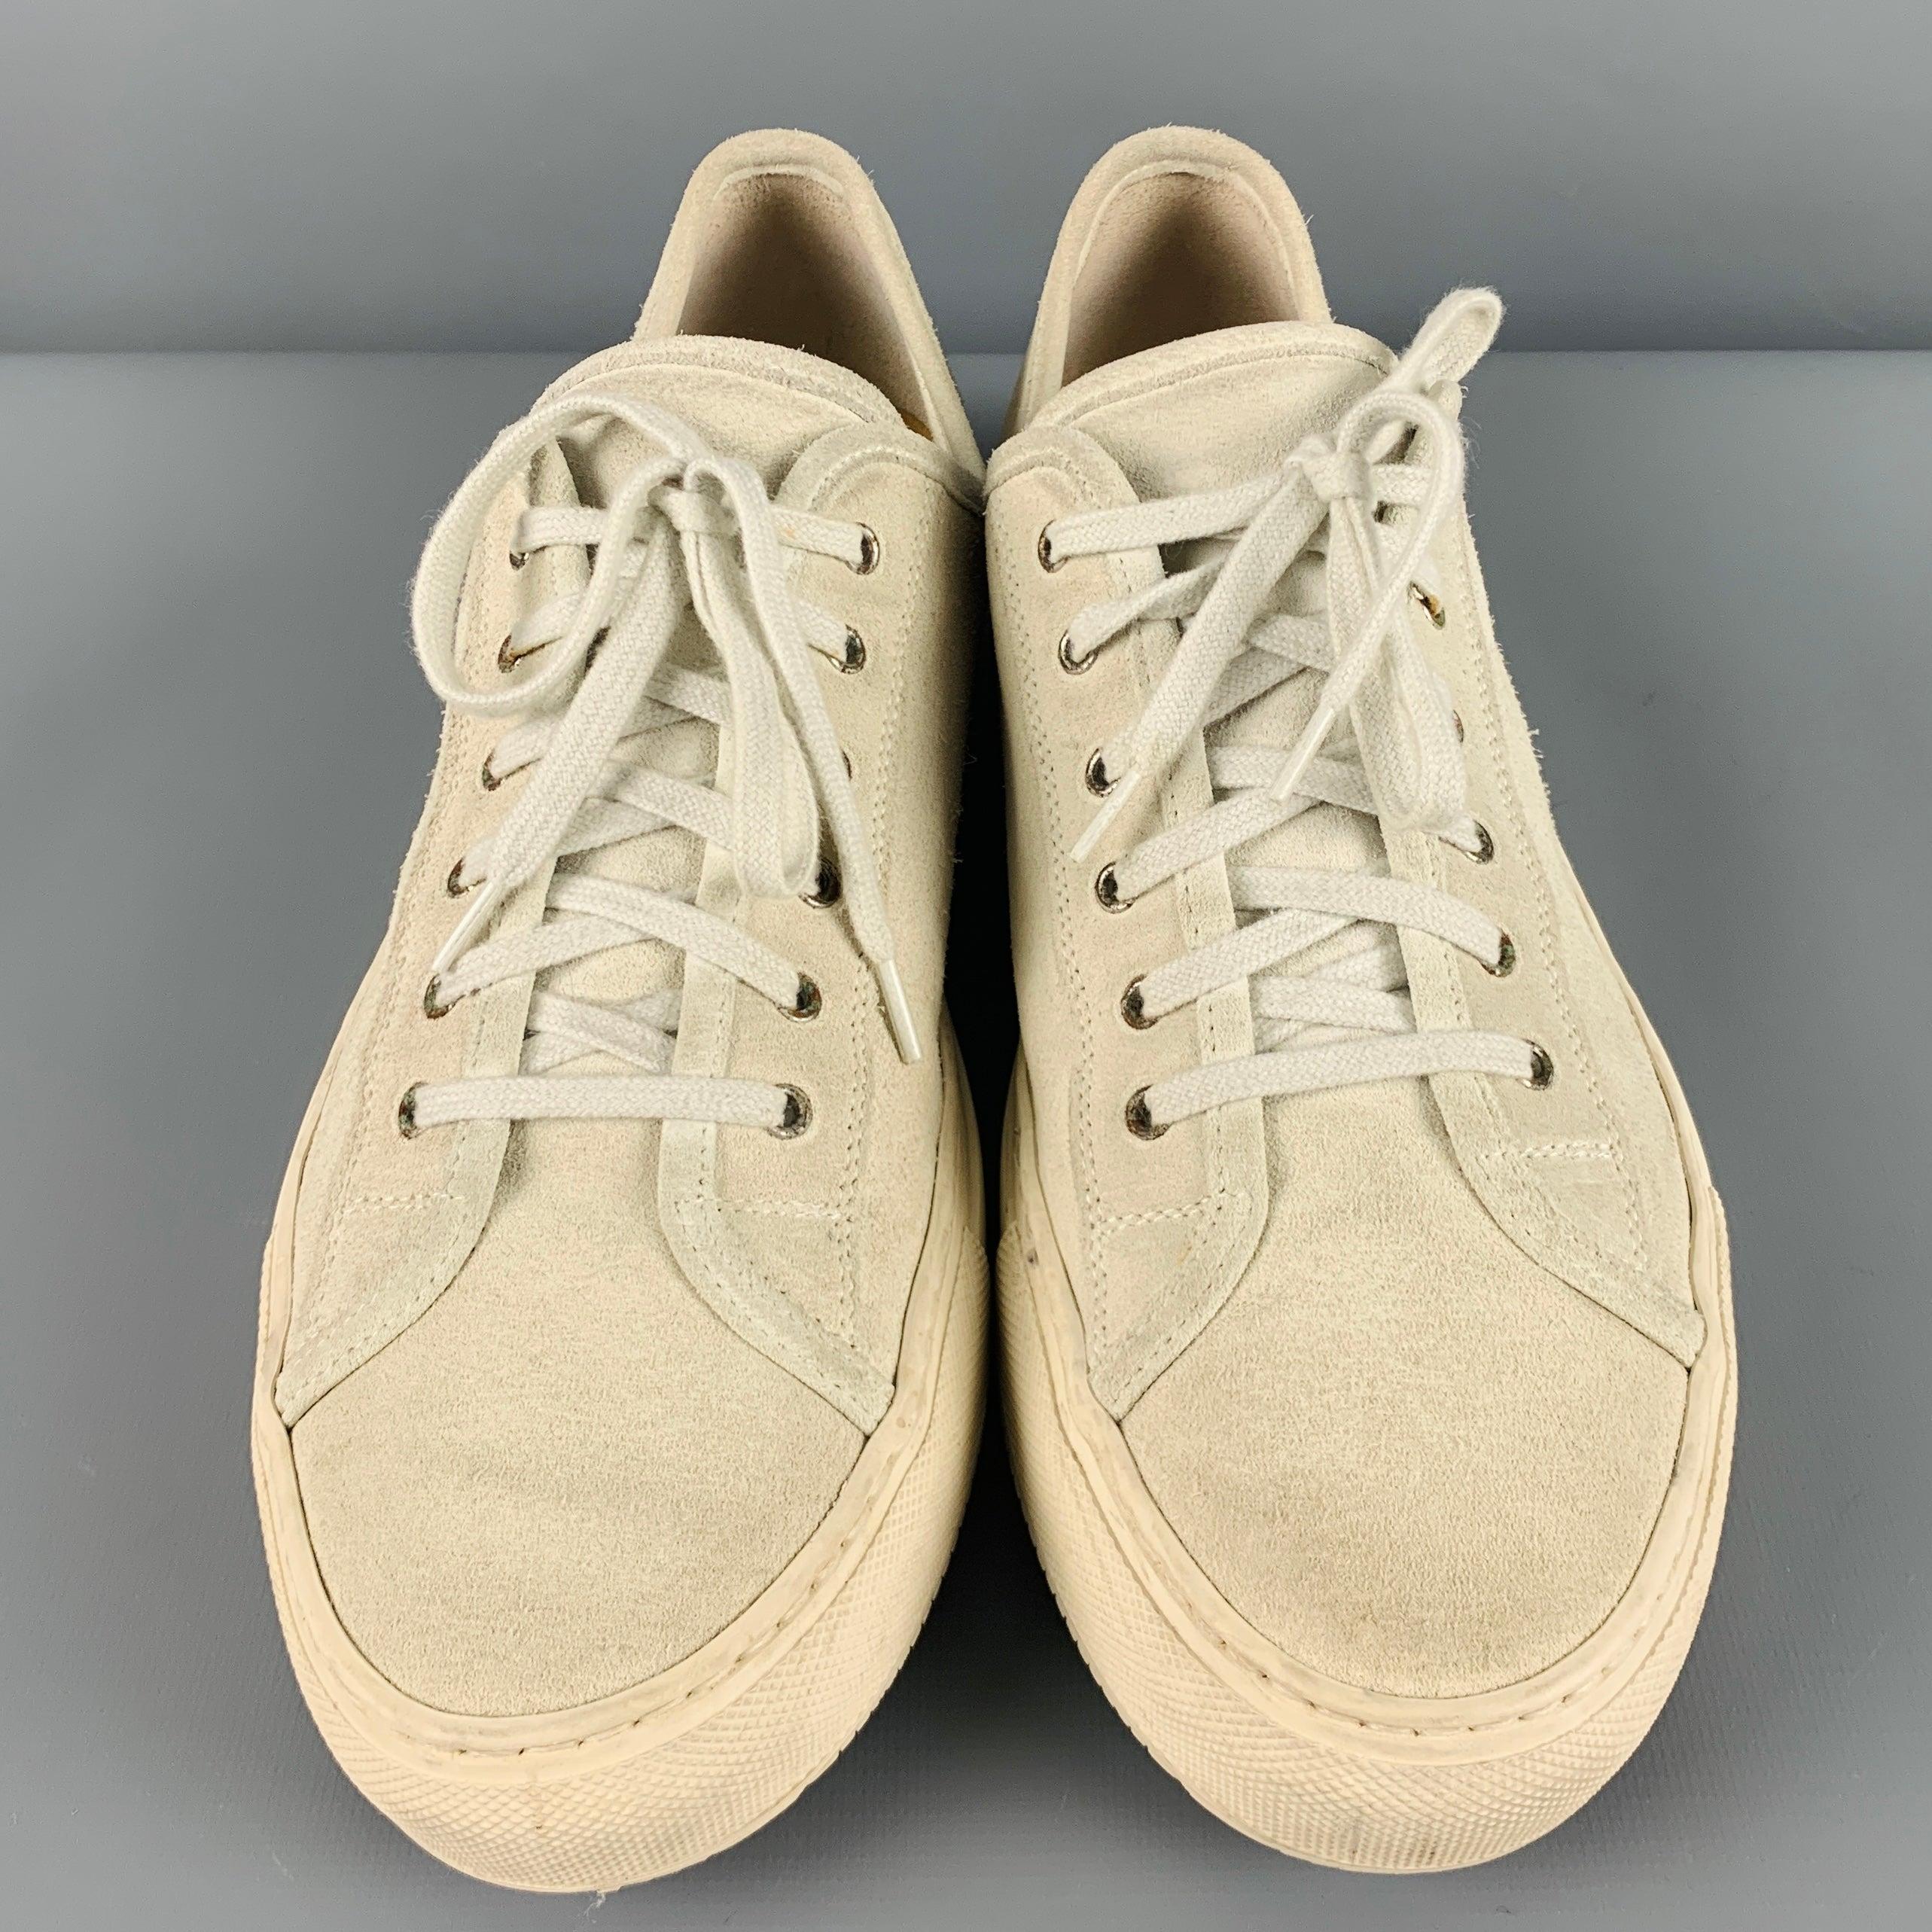 Men's COMMON PROJECTS Size 9 Natural Leather Lace Up Sneakers